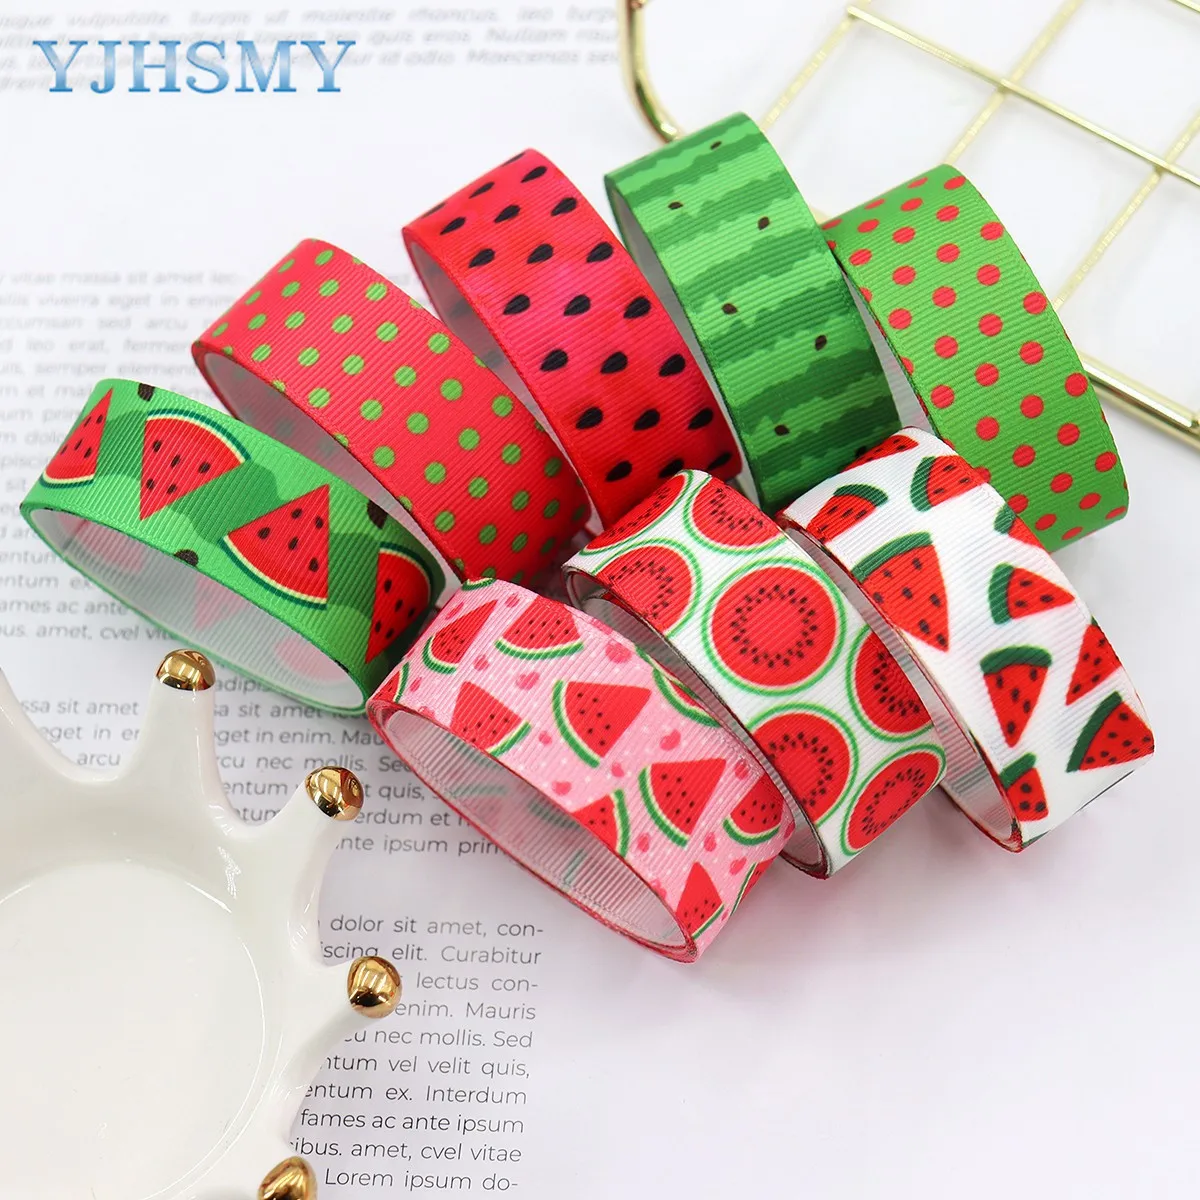 Strawberry Grosgrain Ribbon, 1'' Colorful Strawberry Ribbon Red Pink Green  Strawberry for DIY Craft Wreath Floral Gift Wrapping